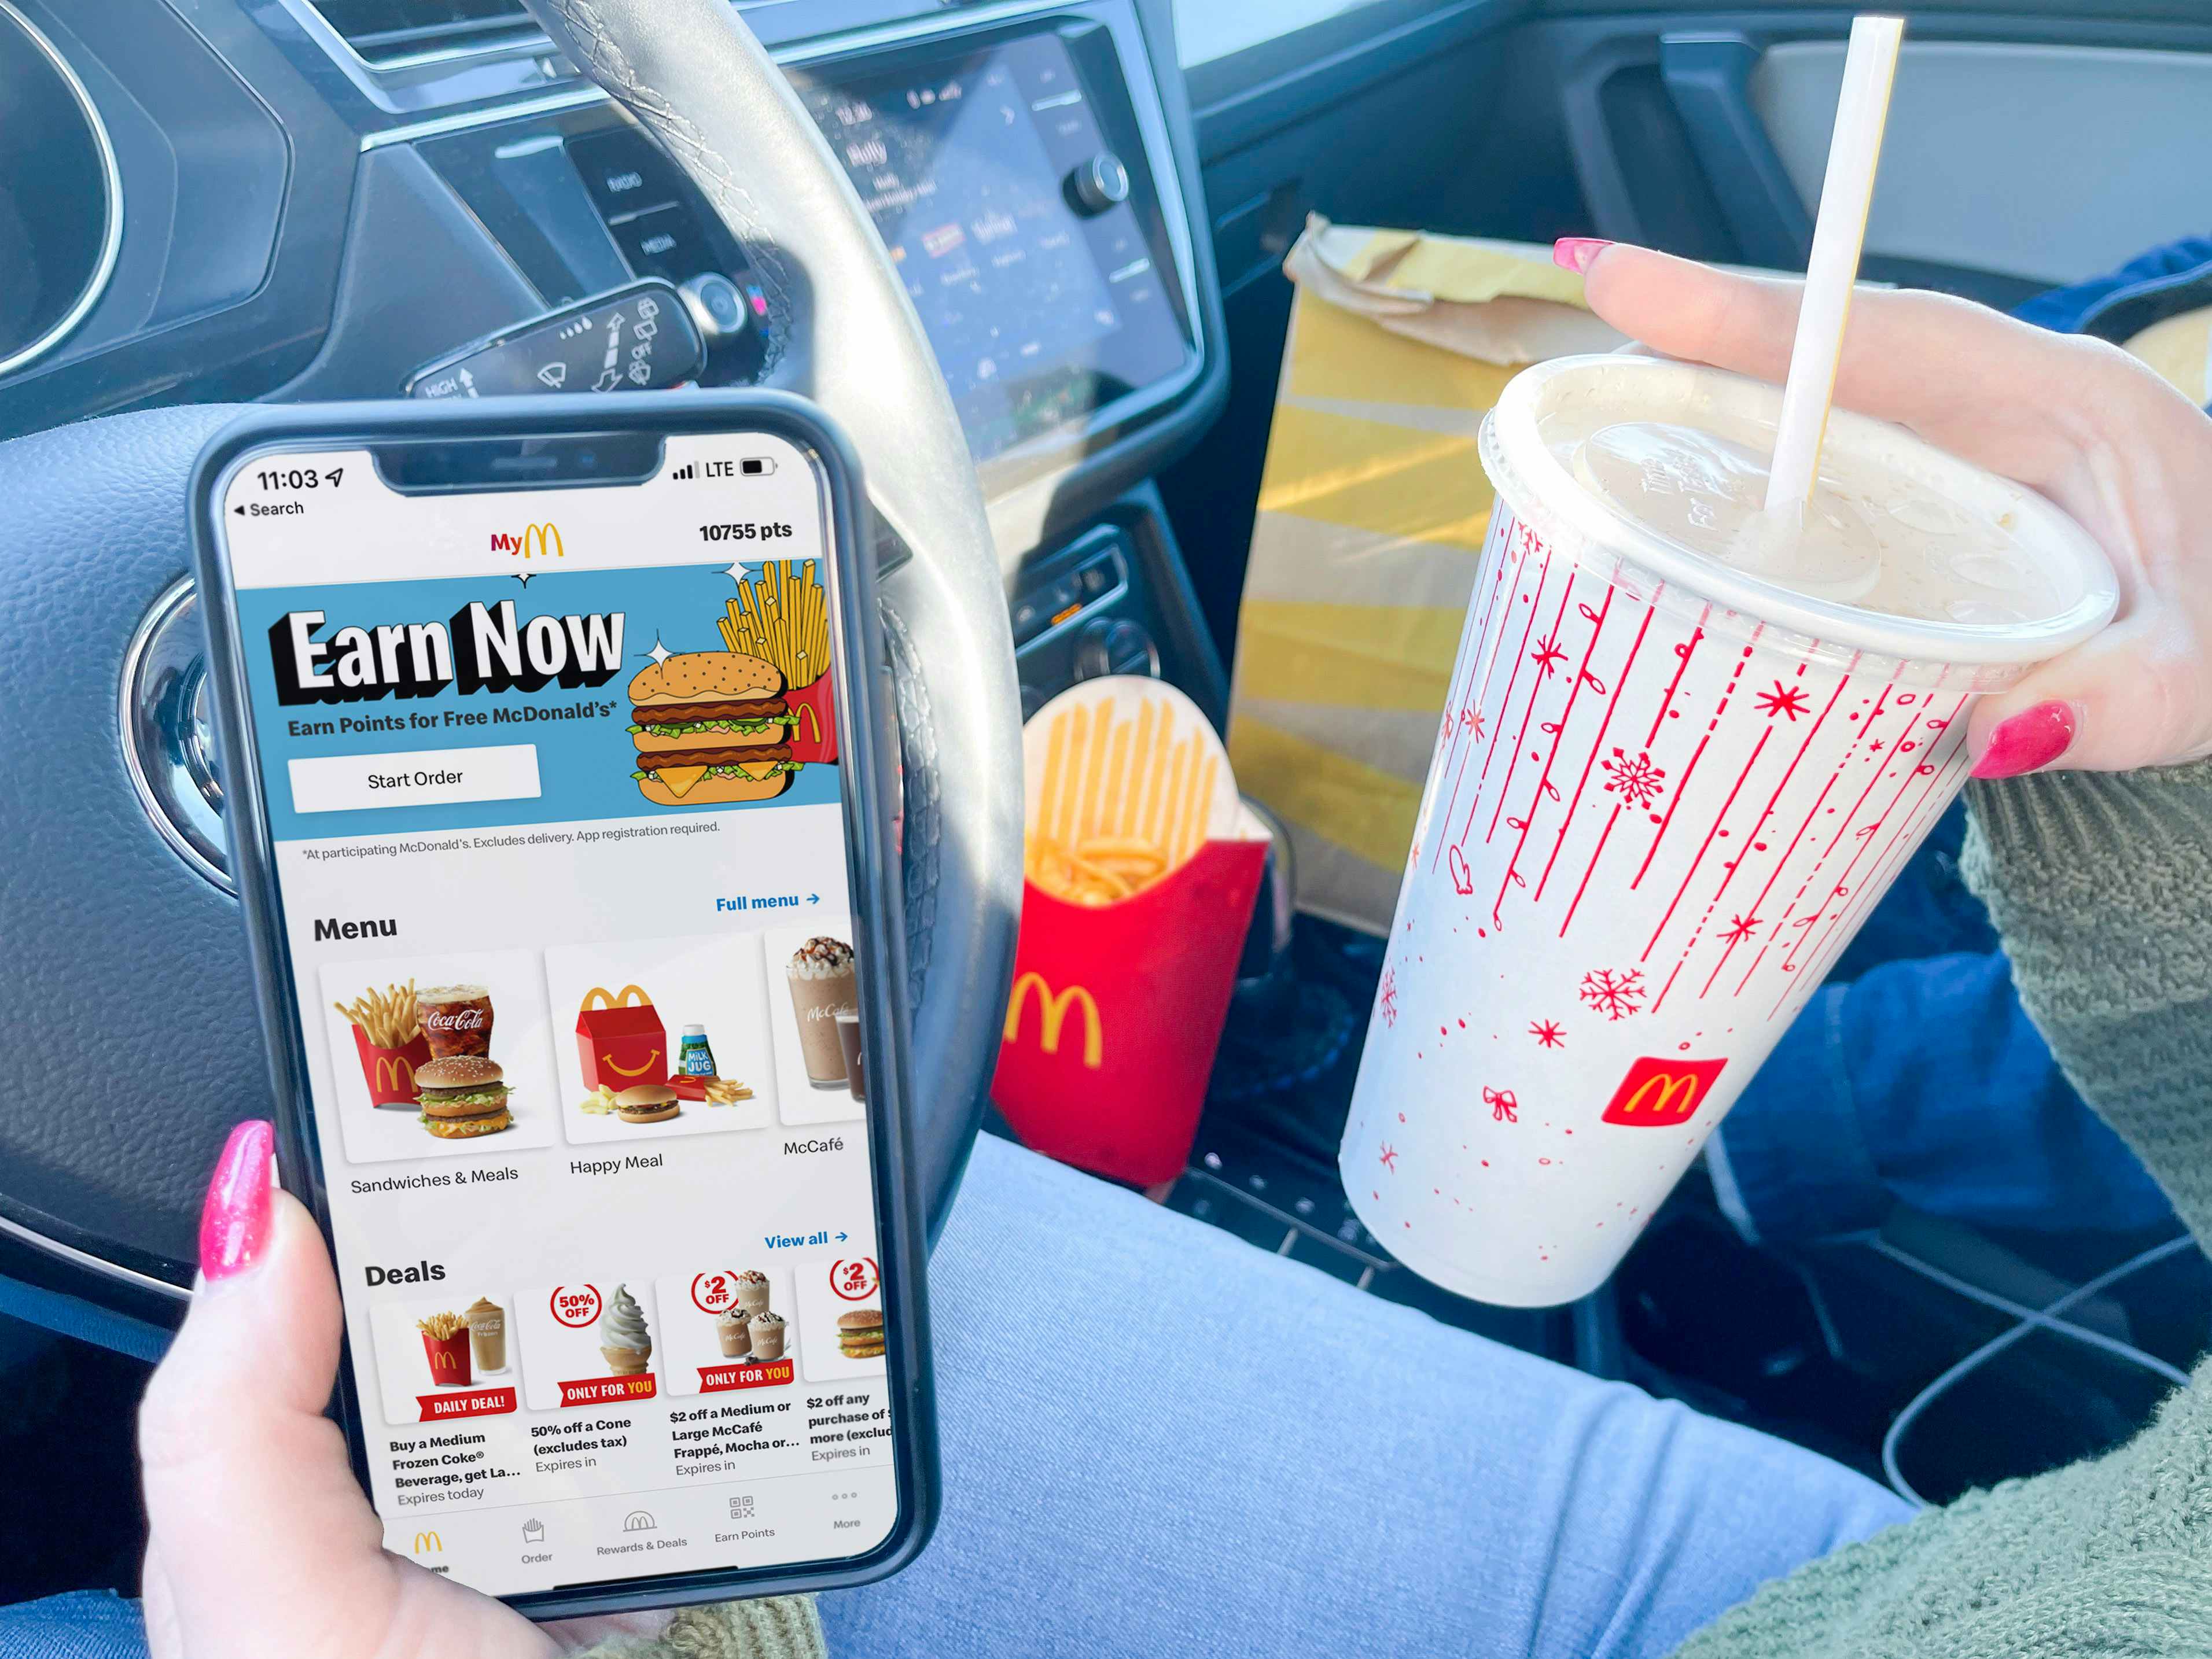 person in car with mcdonalds and app displaying menu